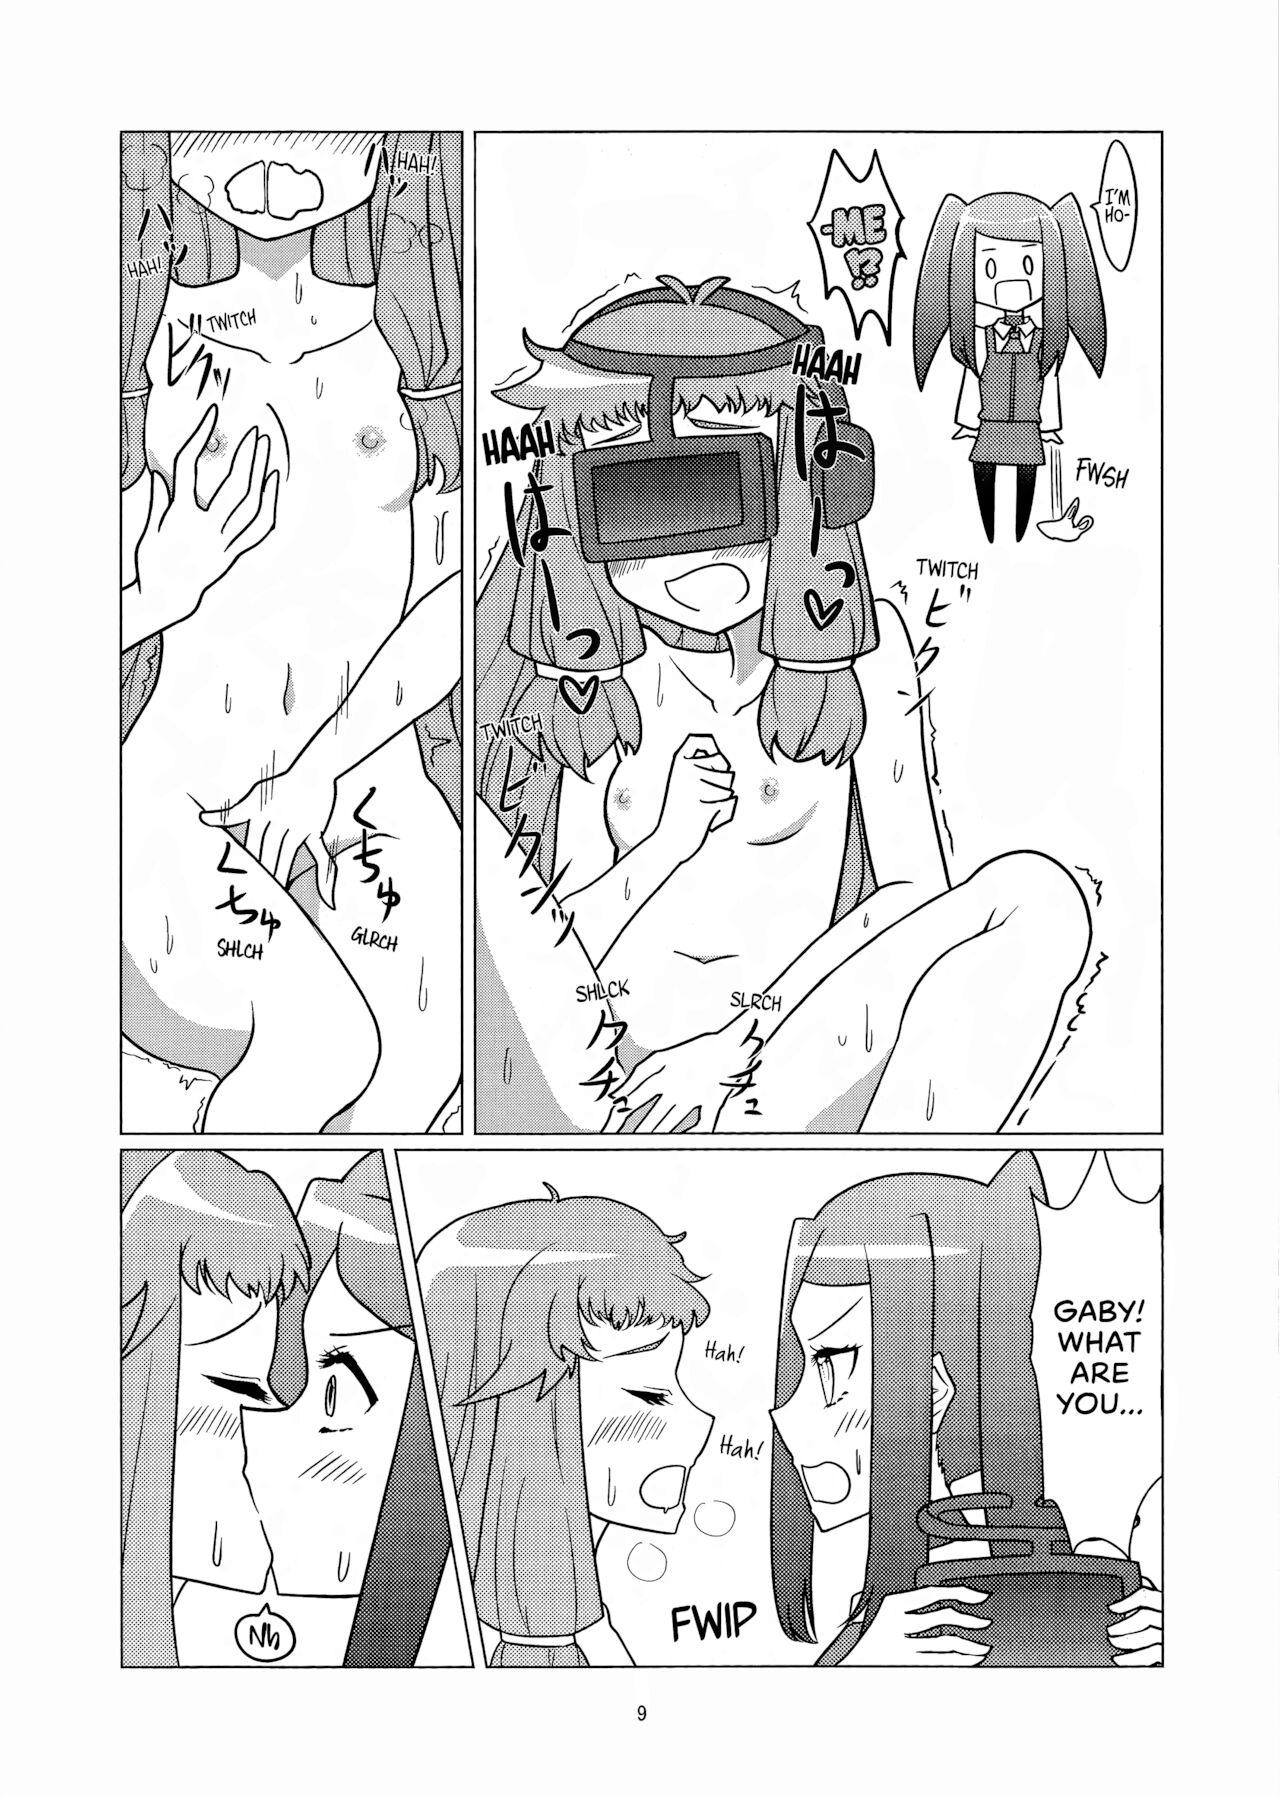 Breasts Angel's Share - Va-11 hall-a Pure 18 - Page 8